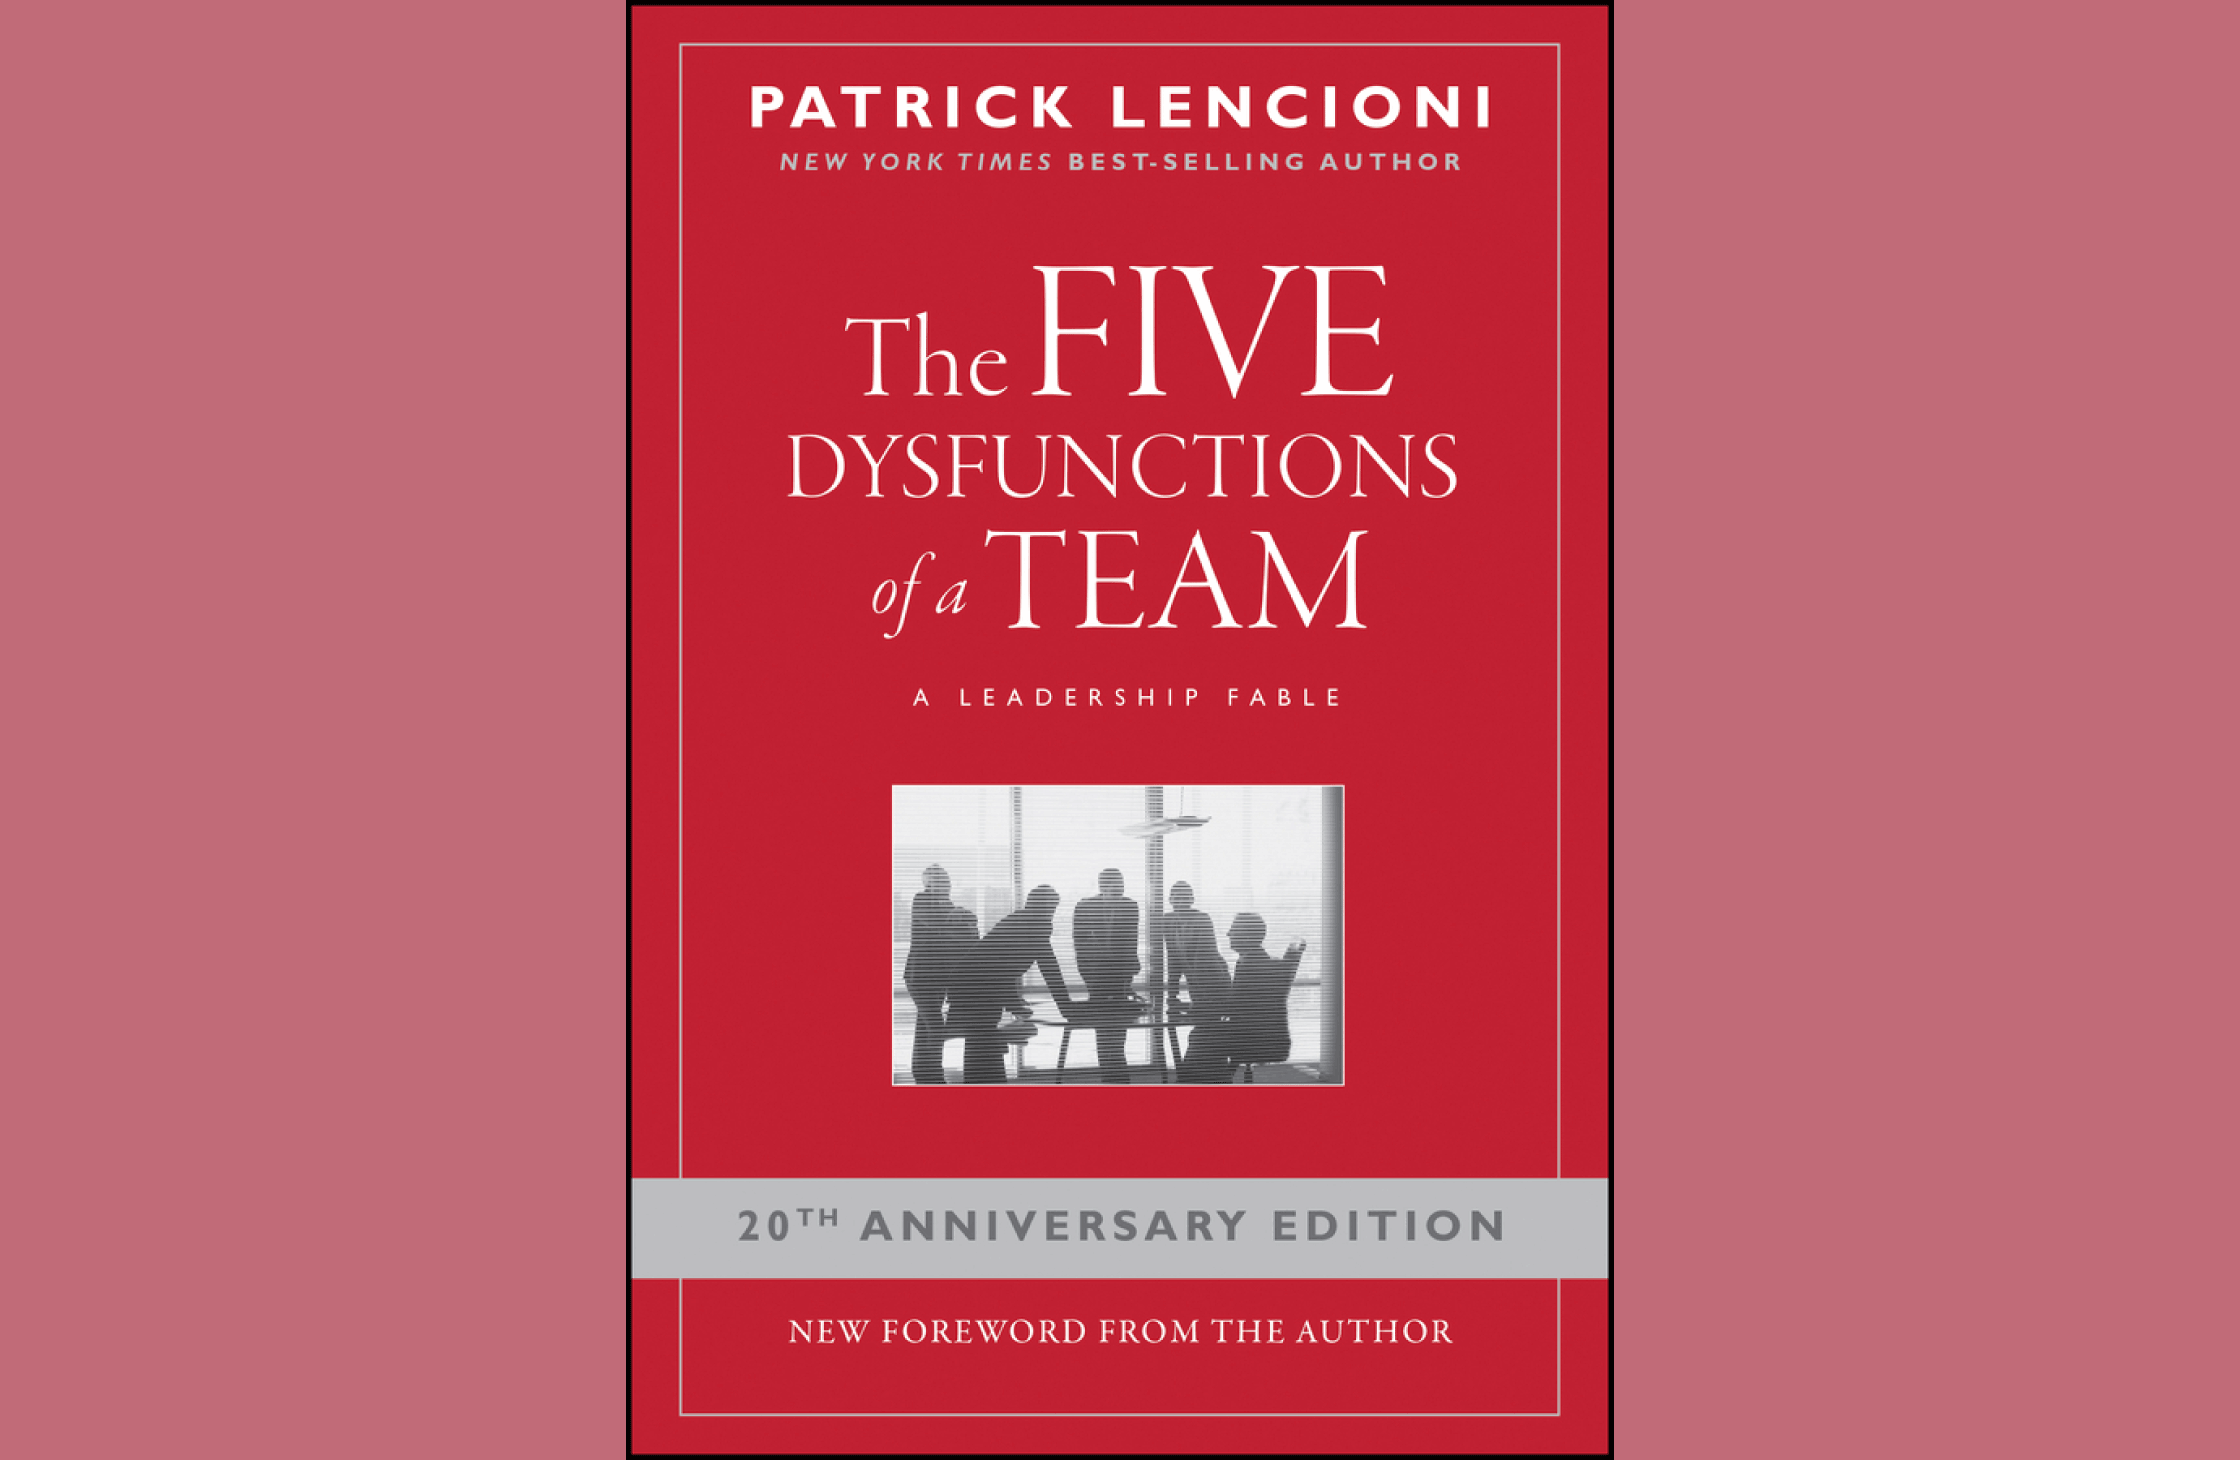 Summary: The Five Dysfunctions of a Team: A Leadership Fable by Patrick M. Lencioni